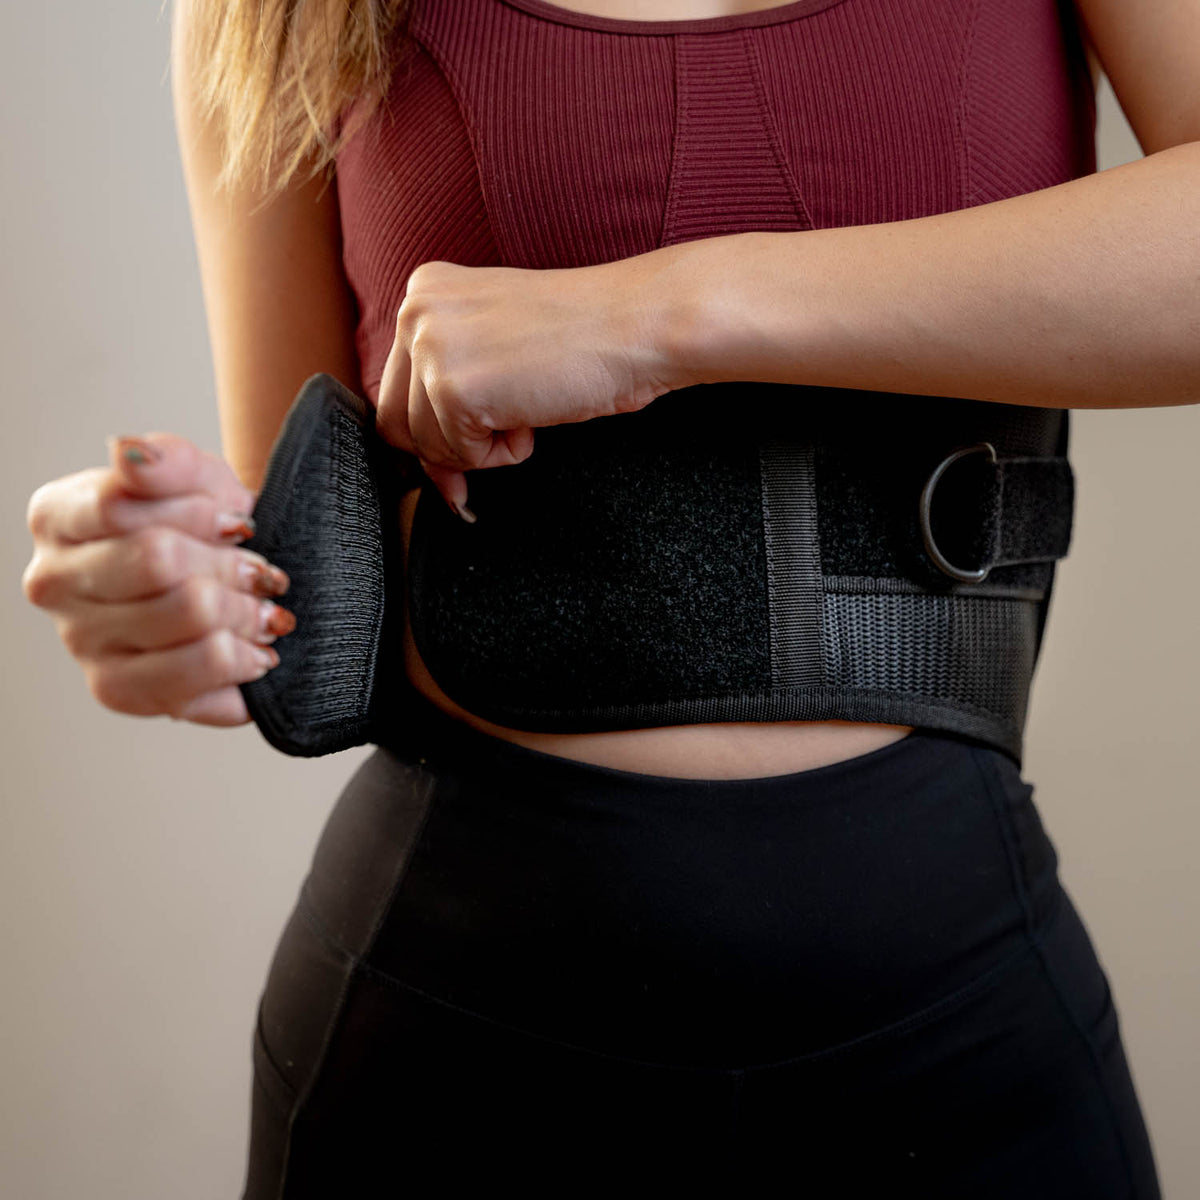 A close up of the back brace being adjusted around a woman’s waist